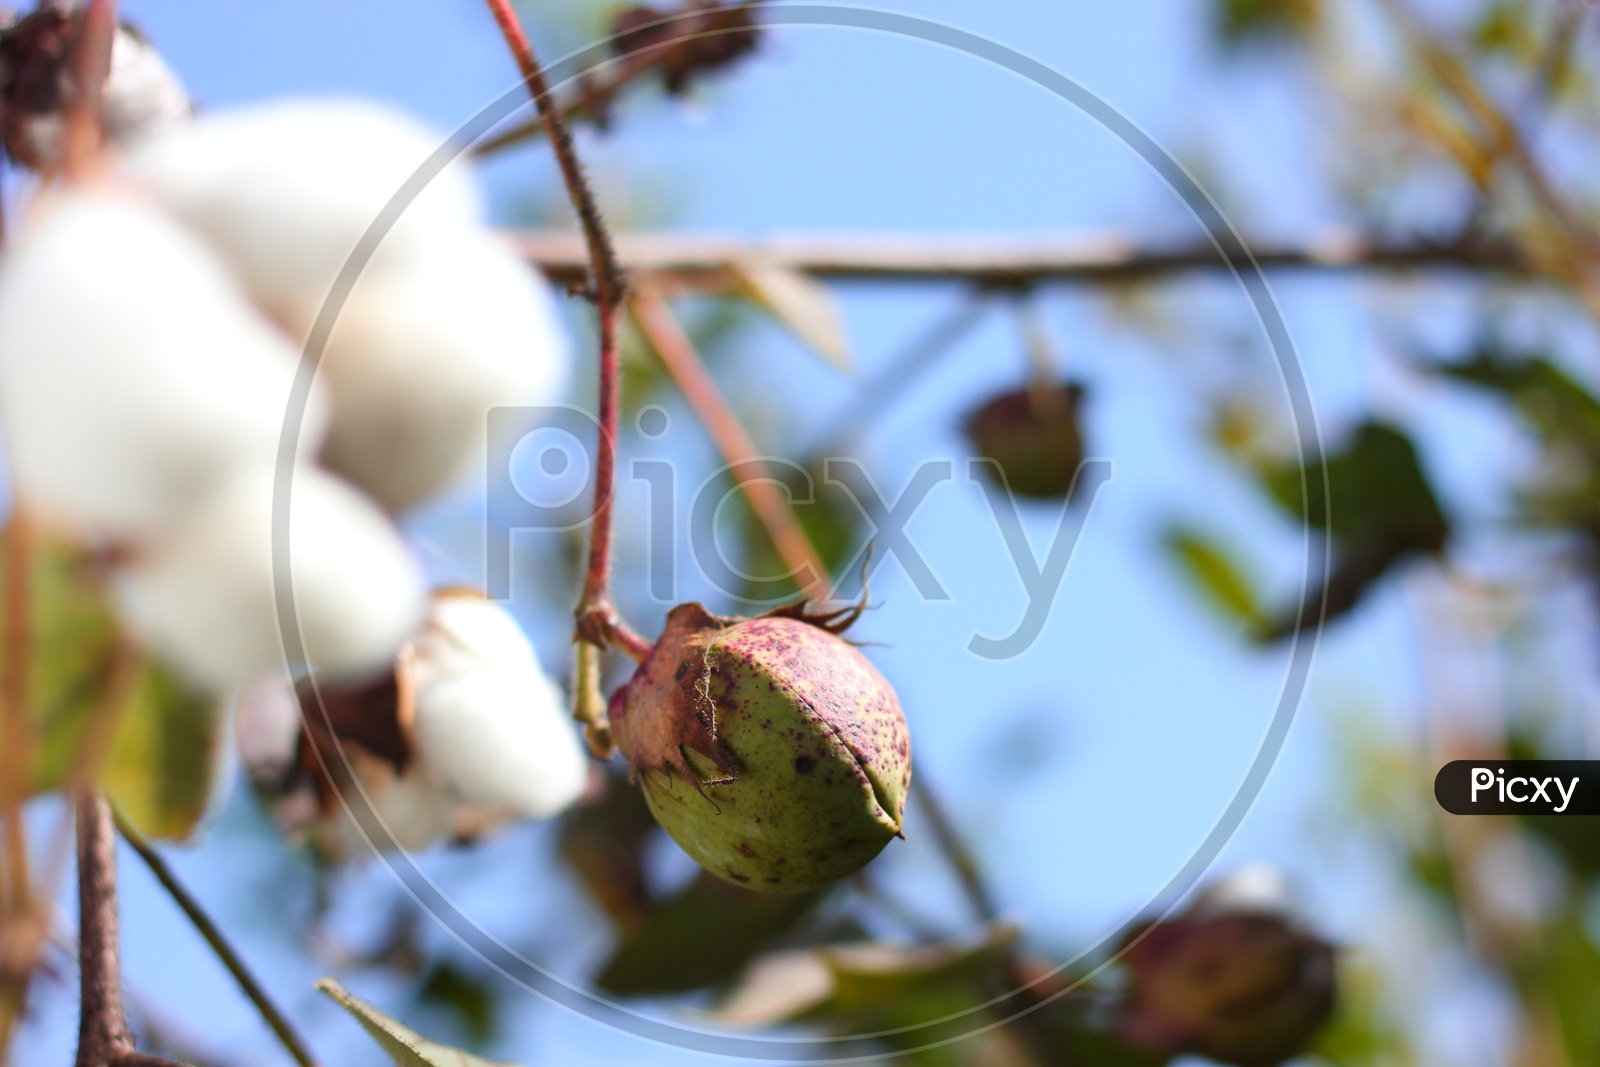 Cotton Ball Growing on a Cotton Plant